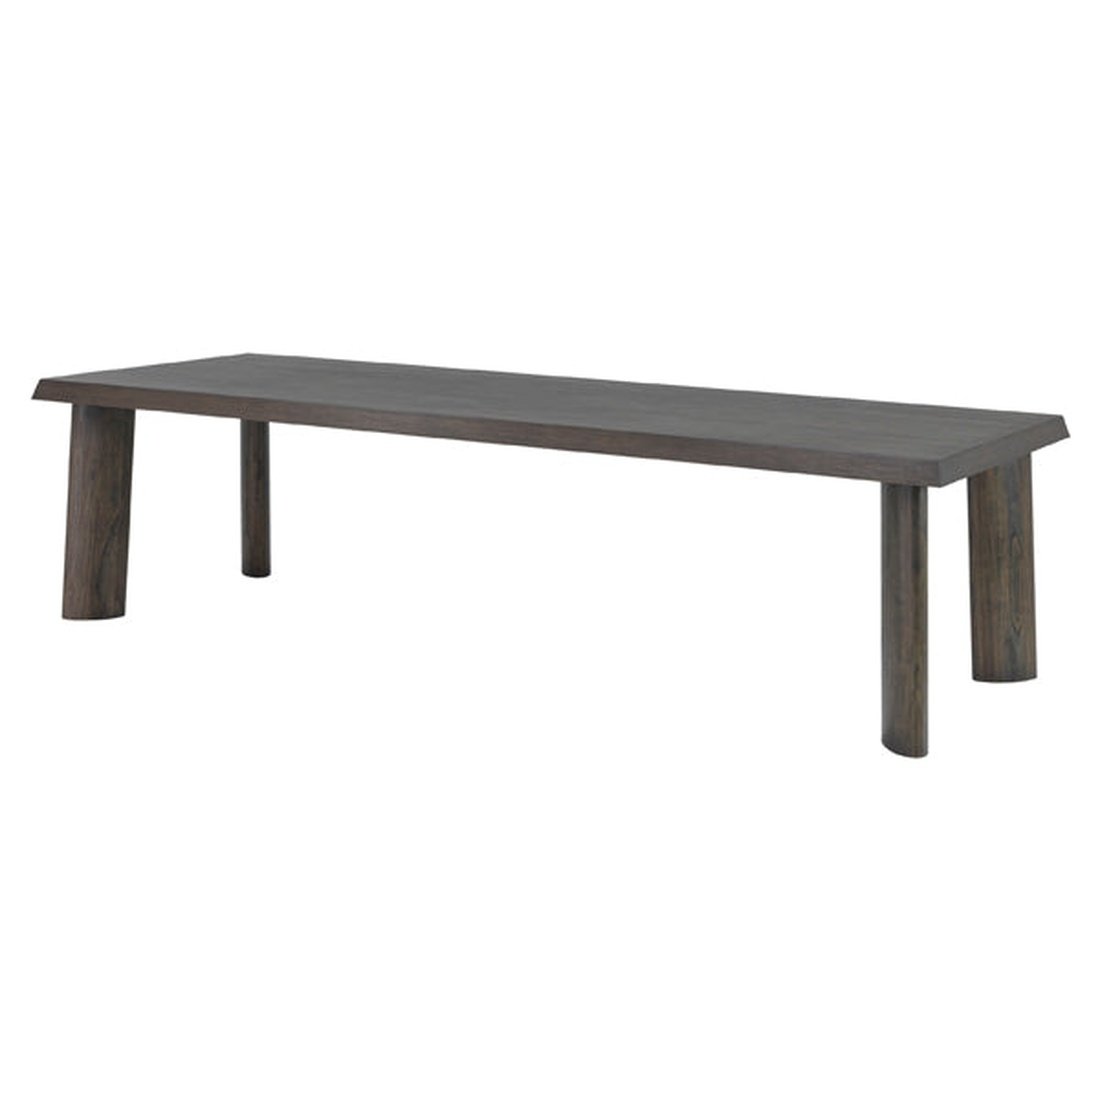 Eichholtz Dune 6 Seater Dining Table